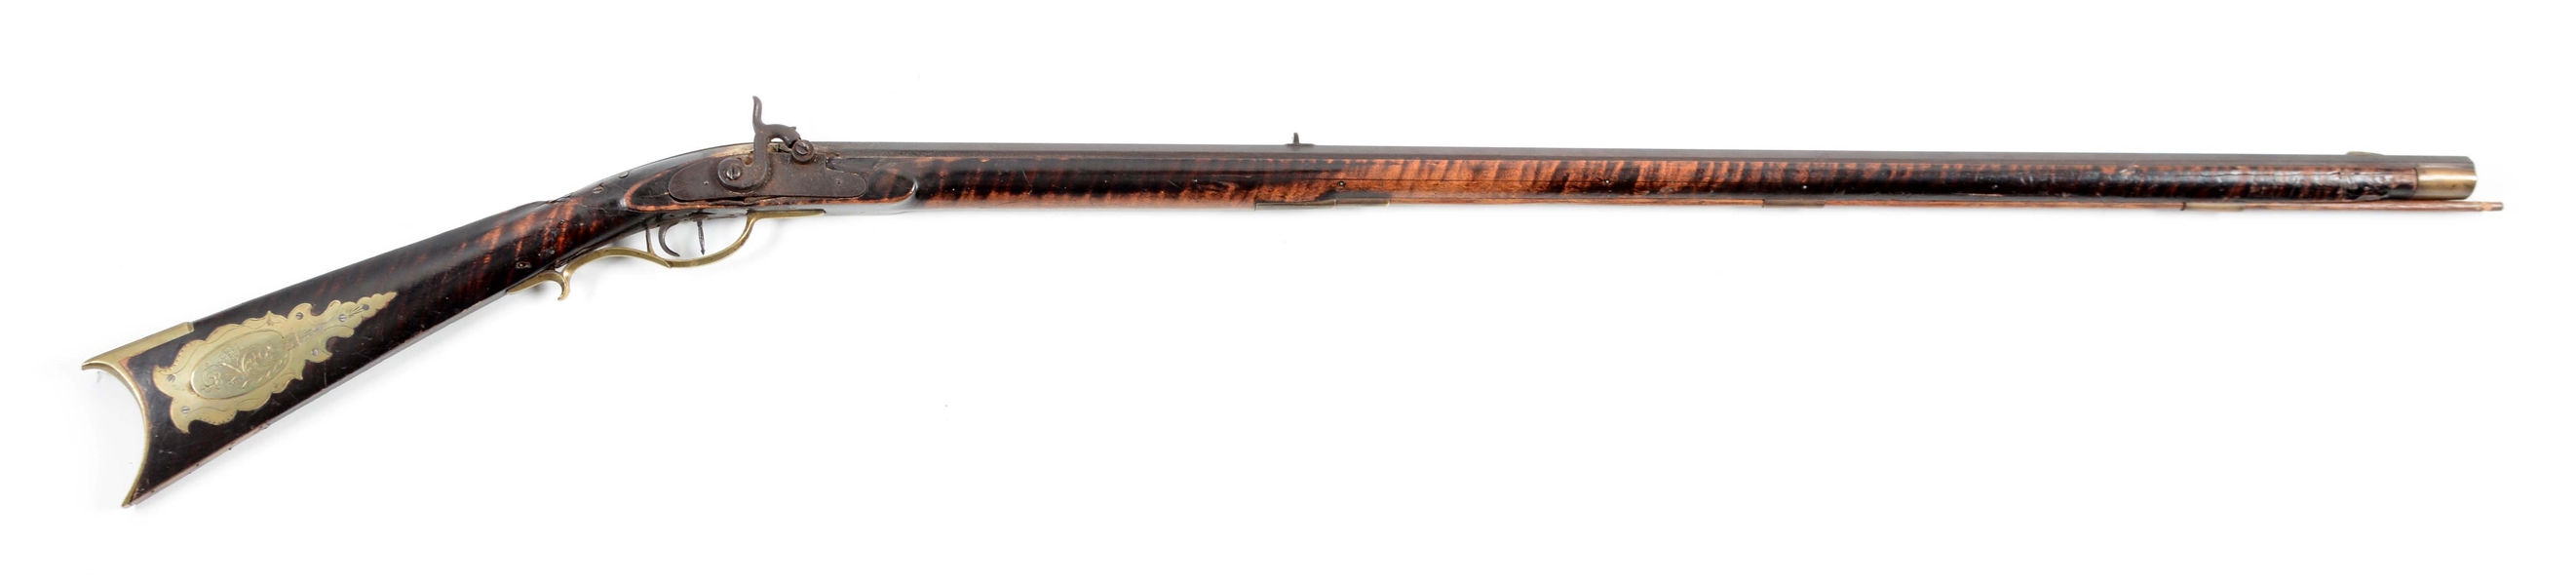 (A) FULLSTOCK PERCUSSION KENTUCKY RIFLE SIGNED BY J.S. JOHNSTON.